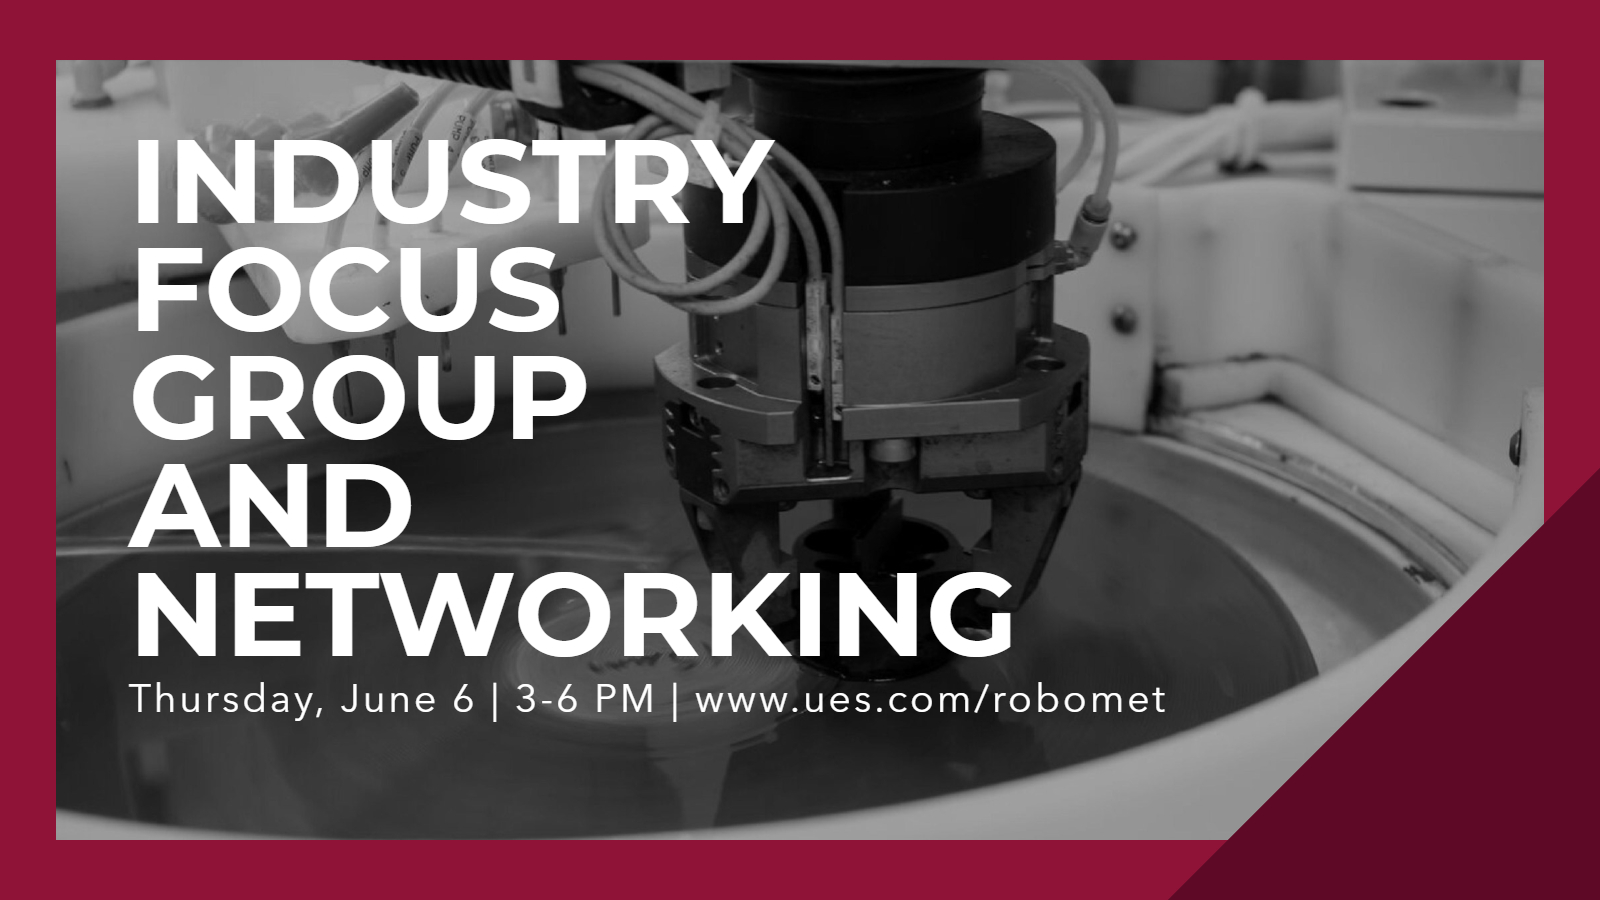 Industry Focus Group Event